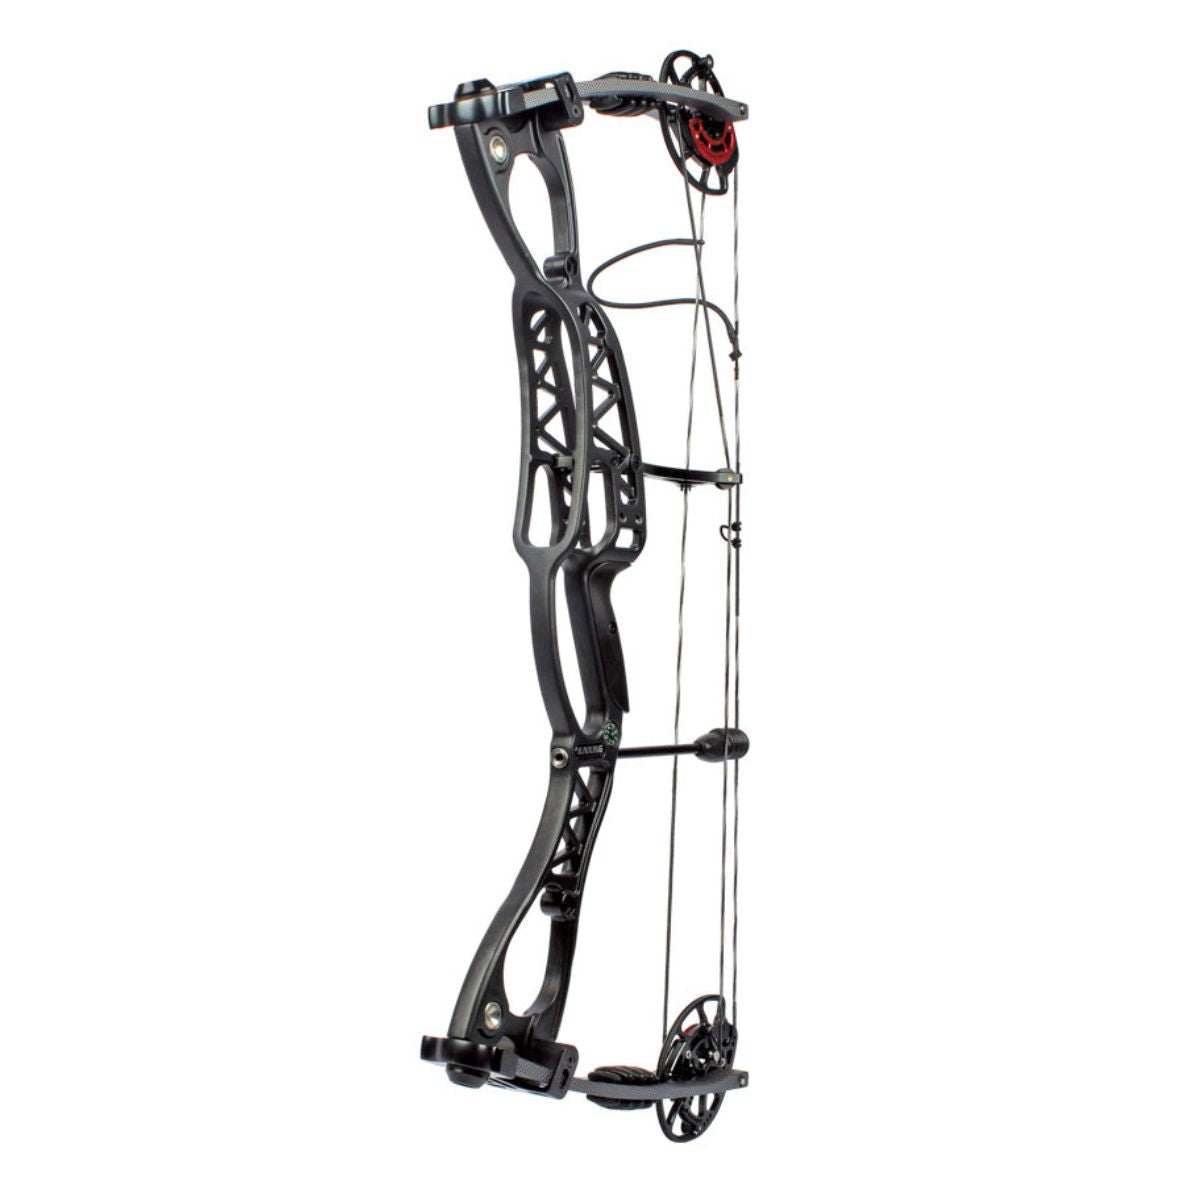 Collision Compound Bow - AC-N122 1